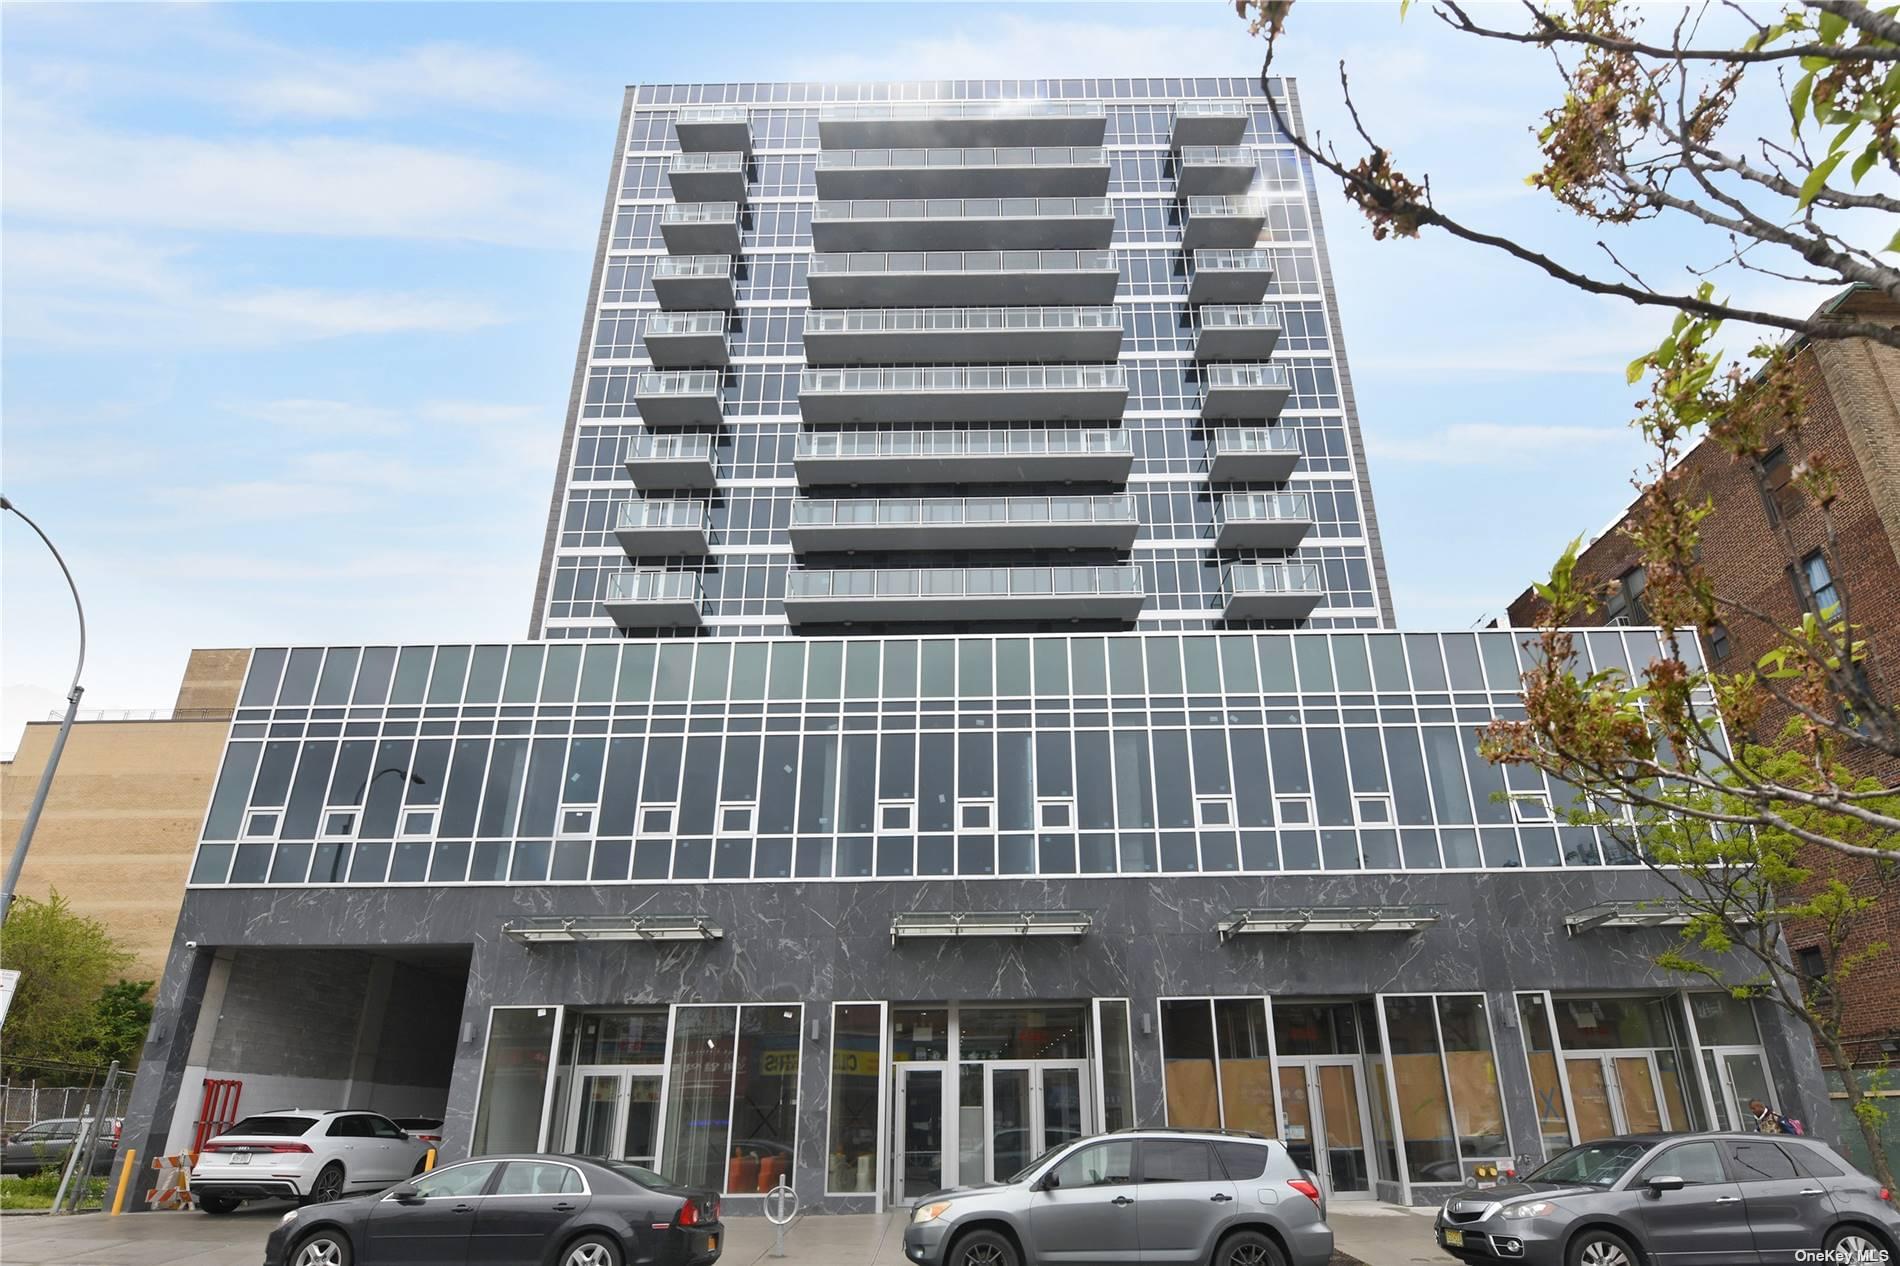 41-62 Bowne Street #4B in Queens, Flushing, NY 11355